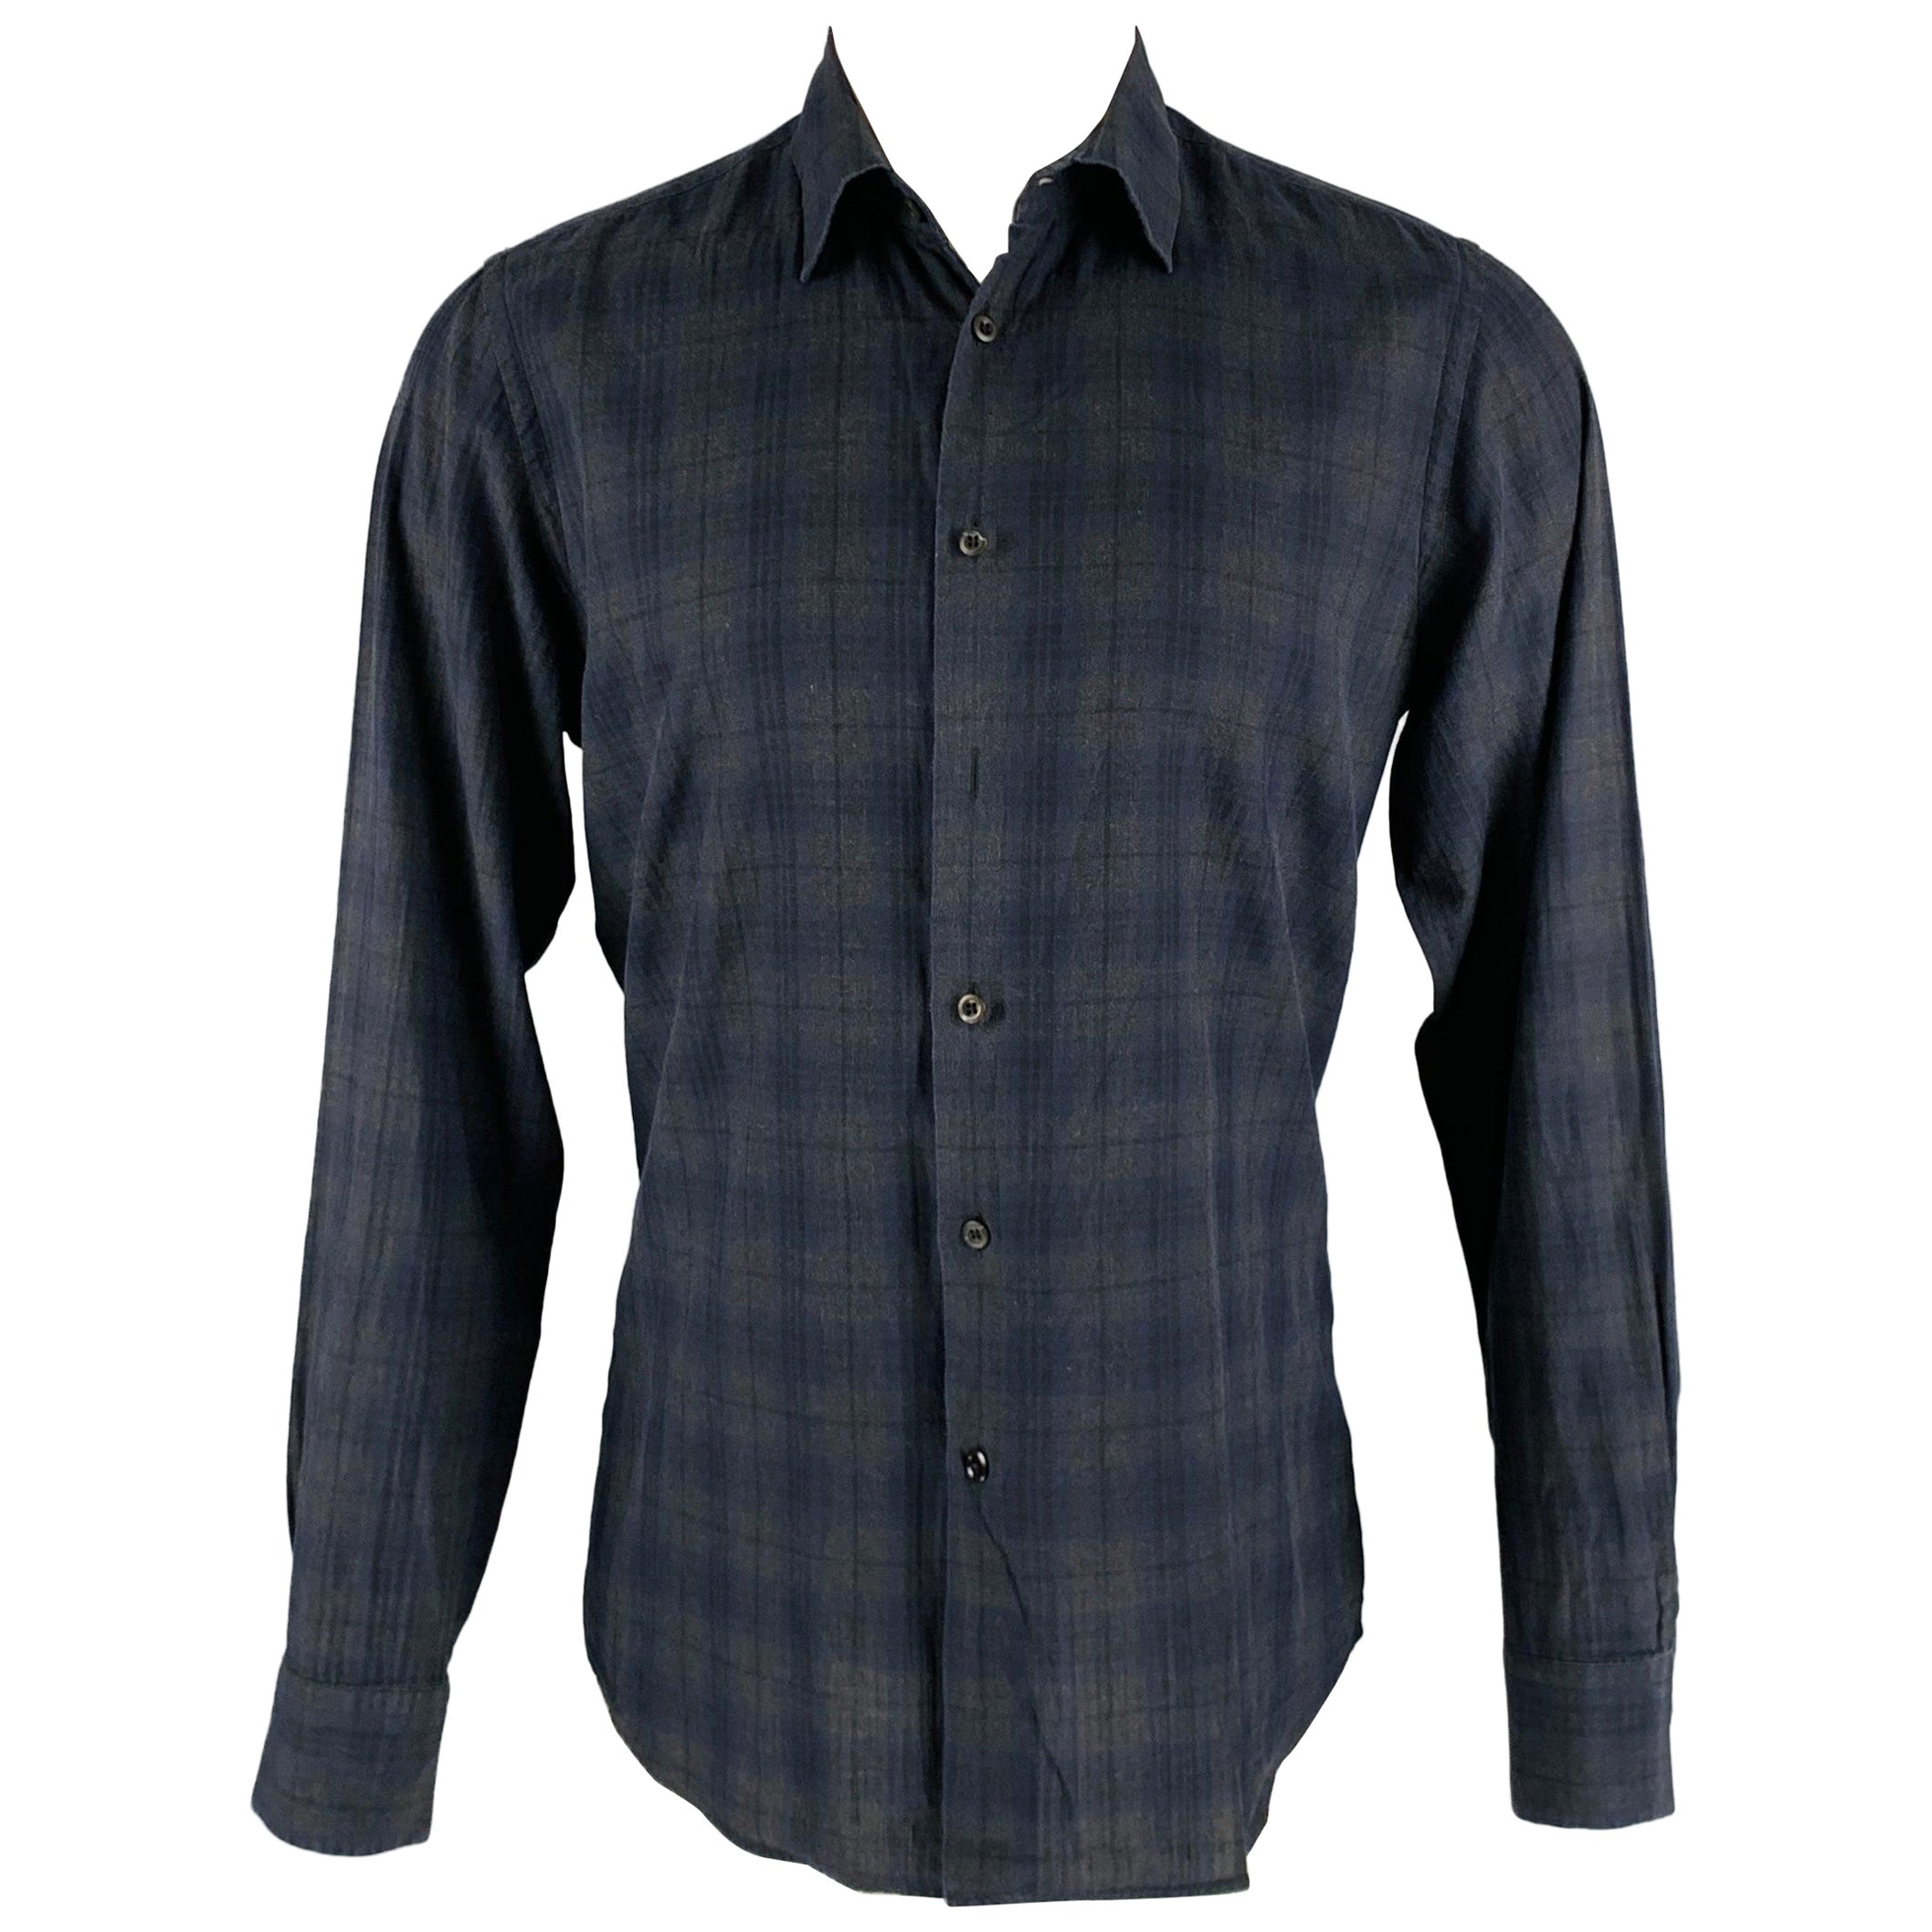 PRADA Size M Charcoal Navy Plaid Cotton Button Up Long Sleeve Shirt For Sale